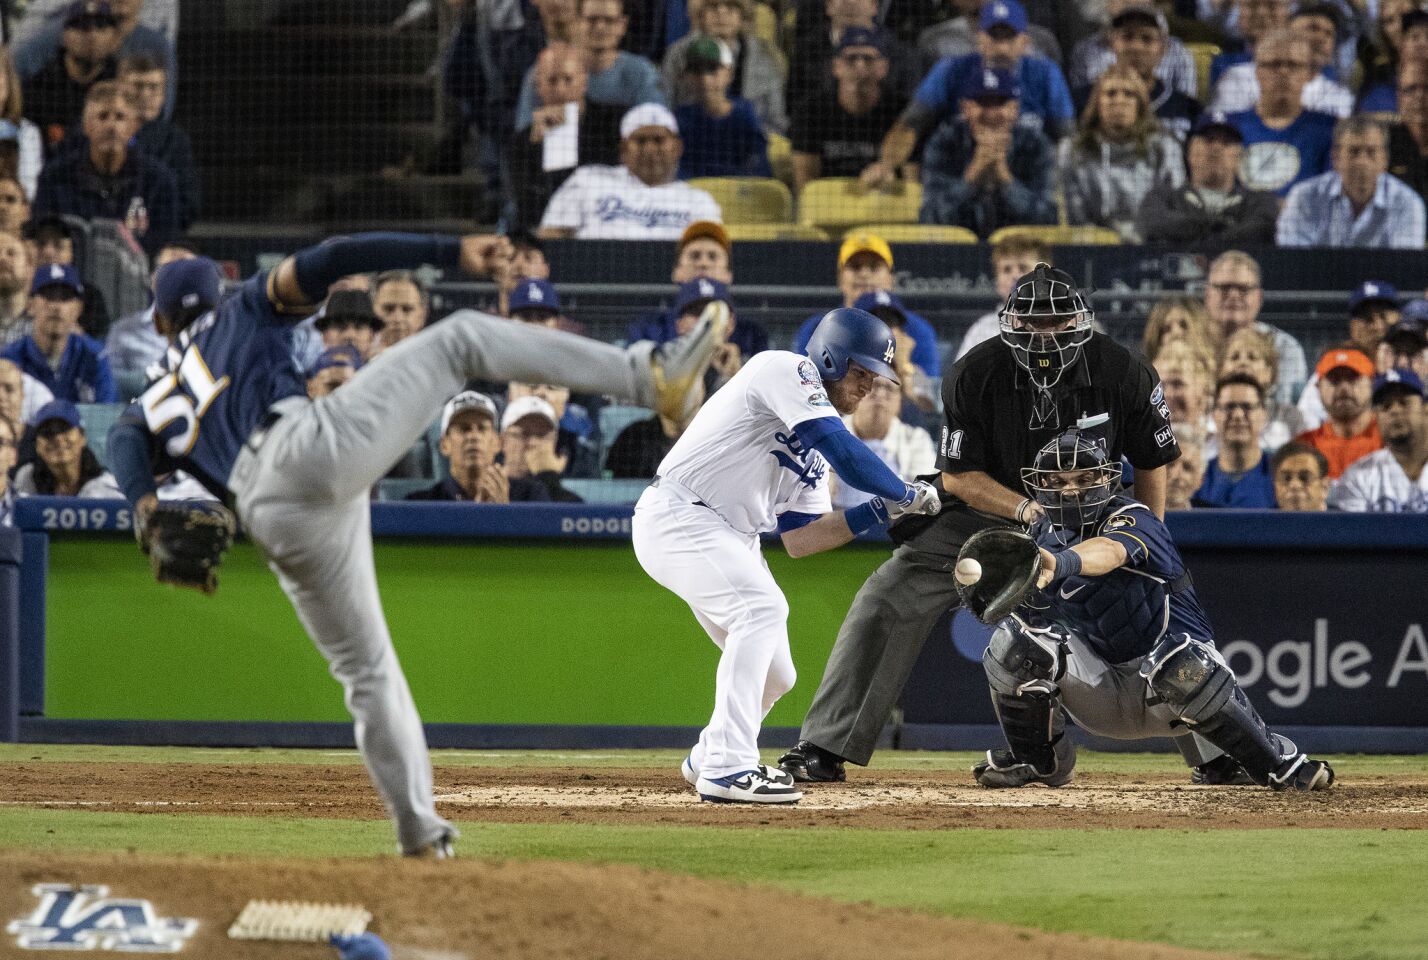 Dodgers first baseman Max Muncy is called-out on strikes with the bases loaded against Brewers pitcher Freddy Peralta in the second inning.